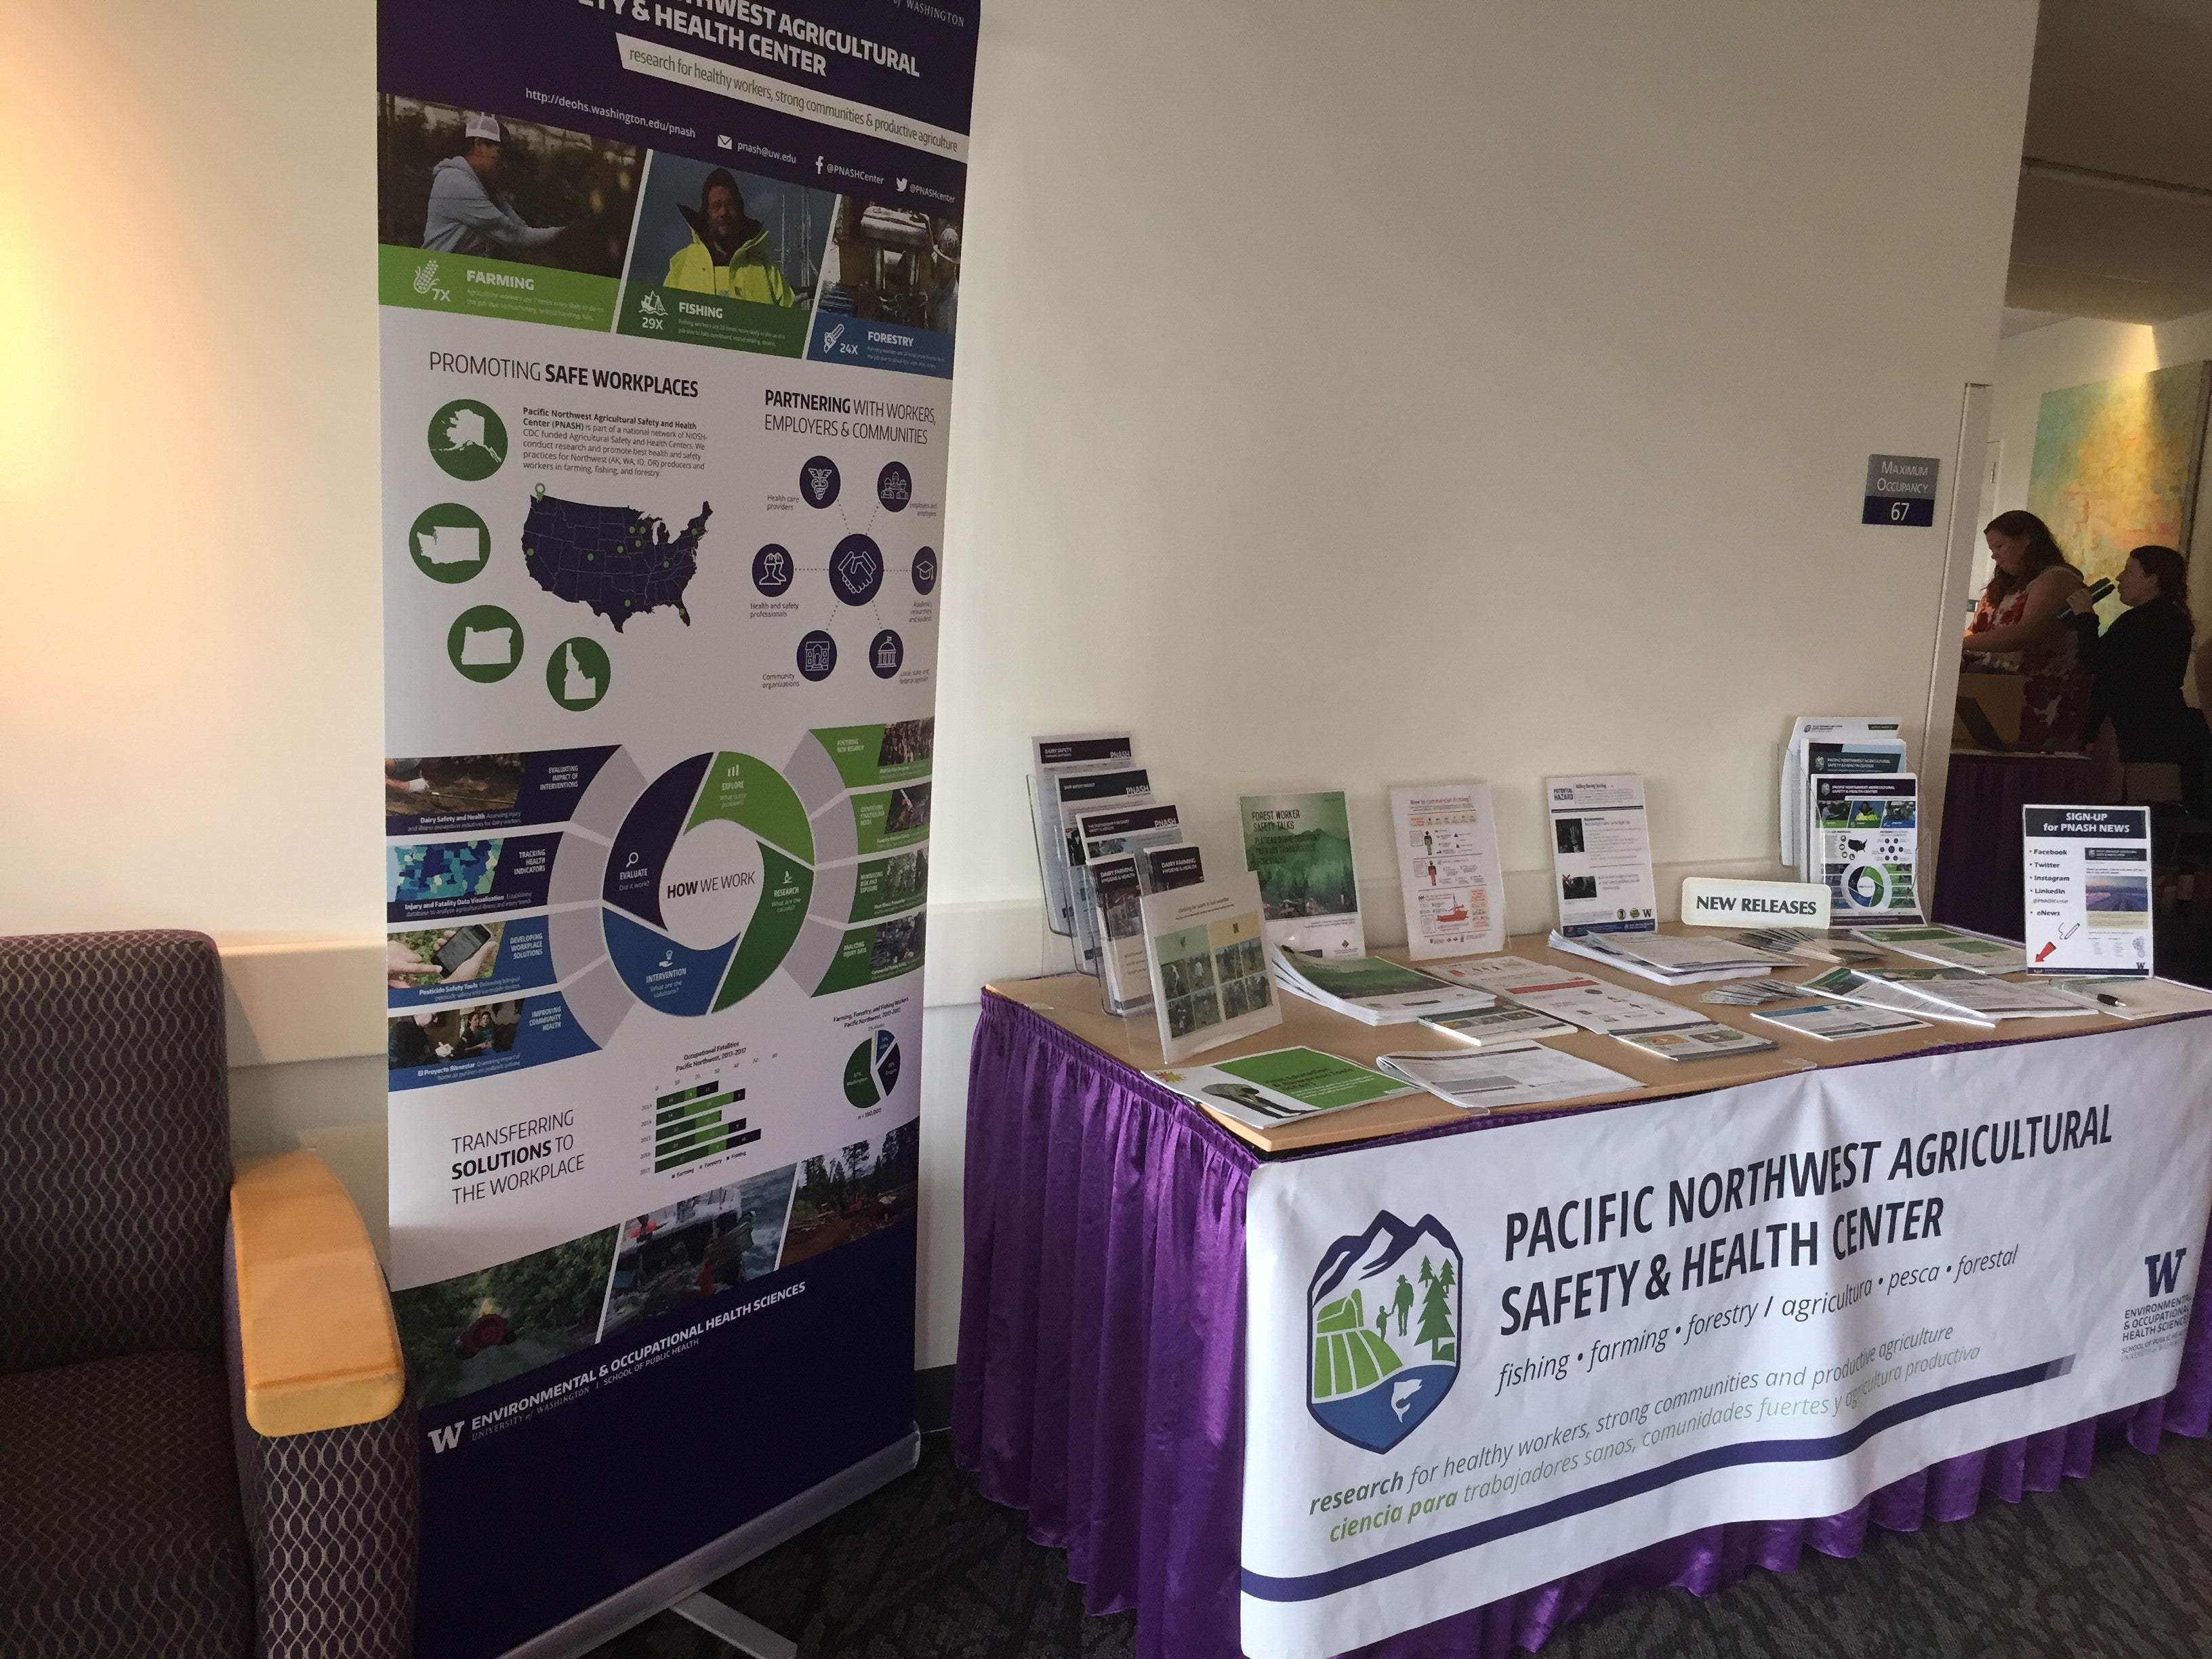 Materials for Pacific Northwest Agricultural Safety and Health Center set up at a conference